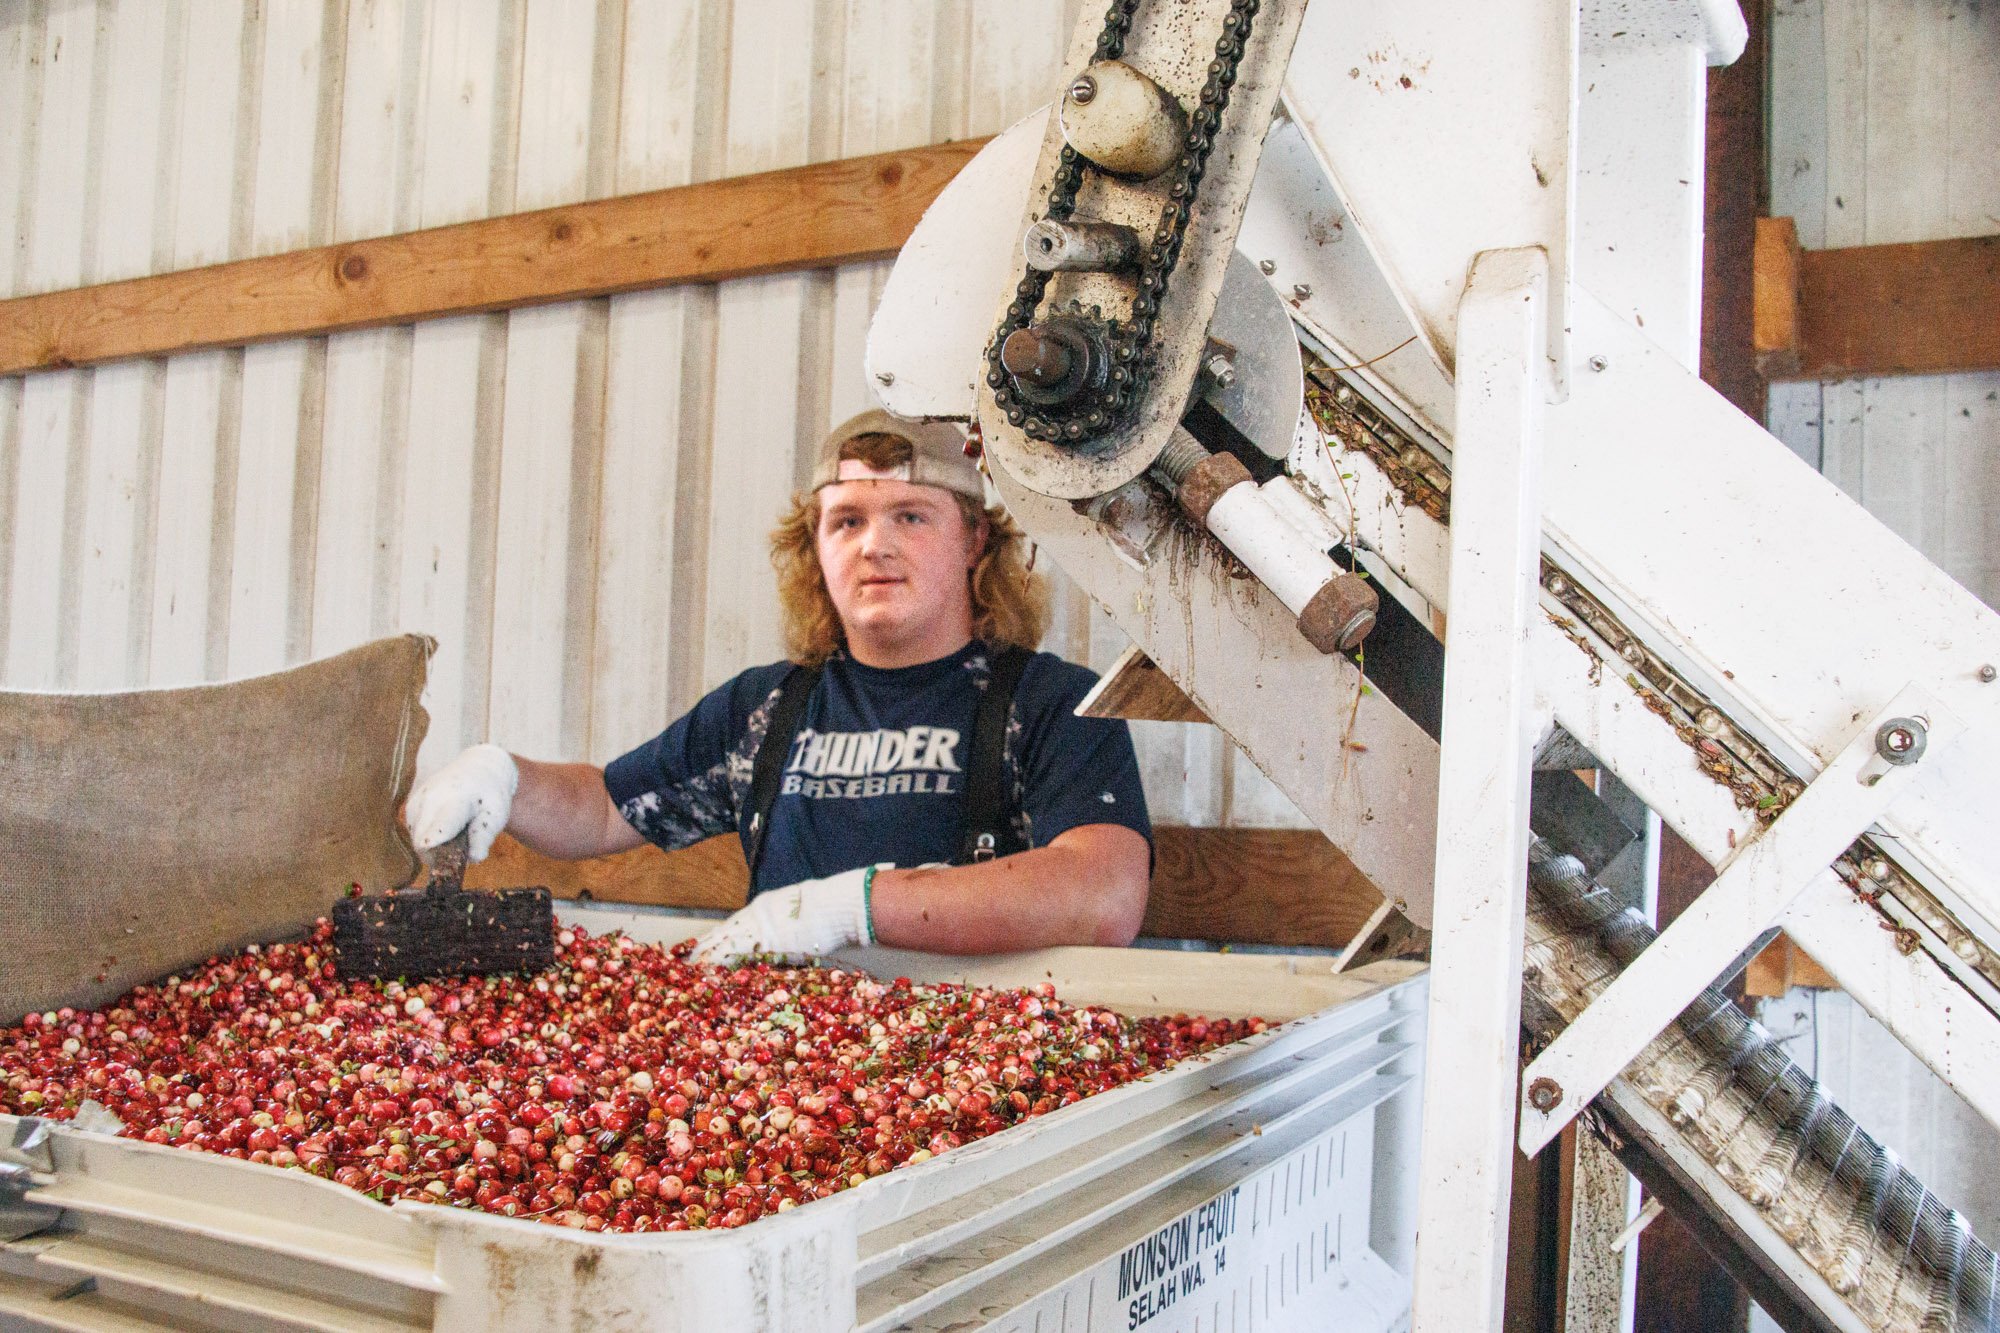 Cranberries in white tub and boy.jpg